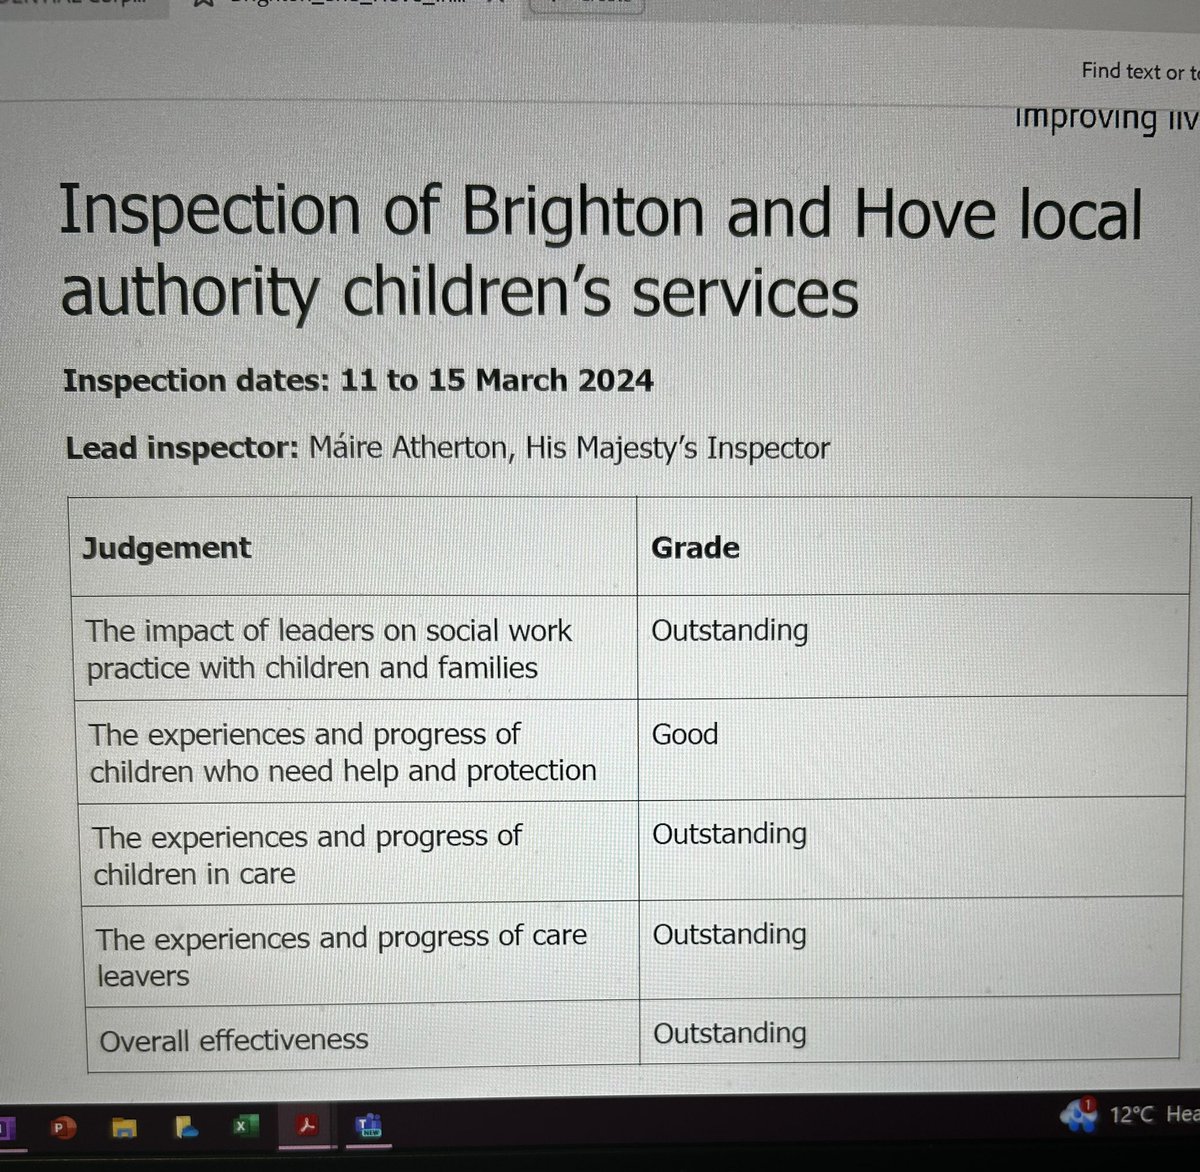 I couldn’t be prouder of all the hard work, commitment and exceptional skill and dedication of staff in achieving this. Making such an important difference to our city’s children and their families. #teamBrighton&Hove @BrightonHoveCC